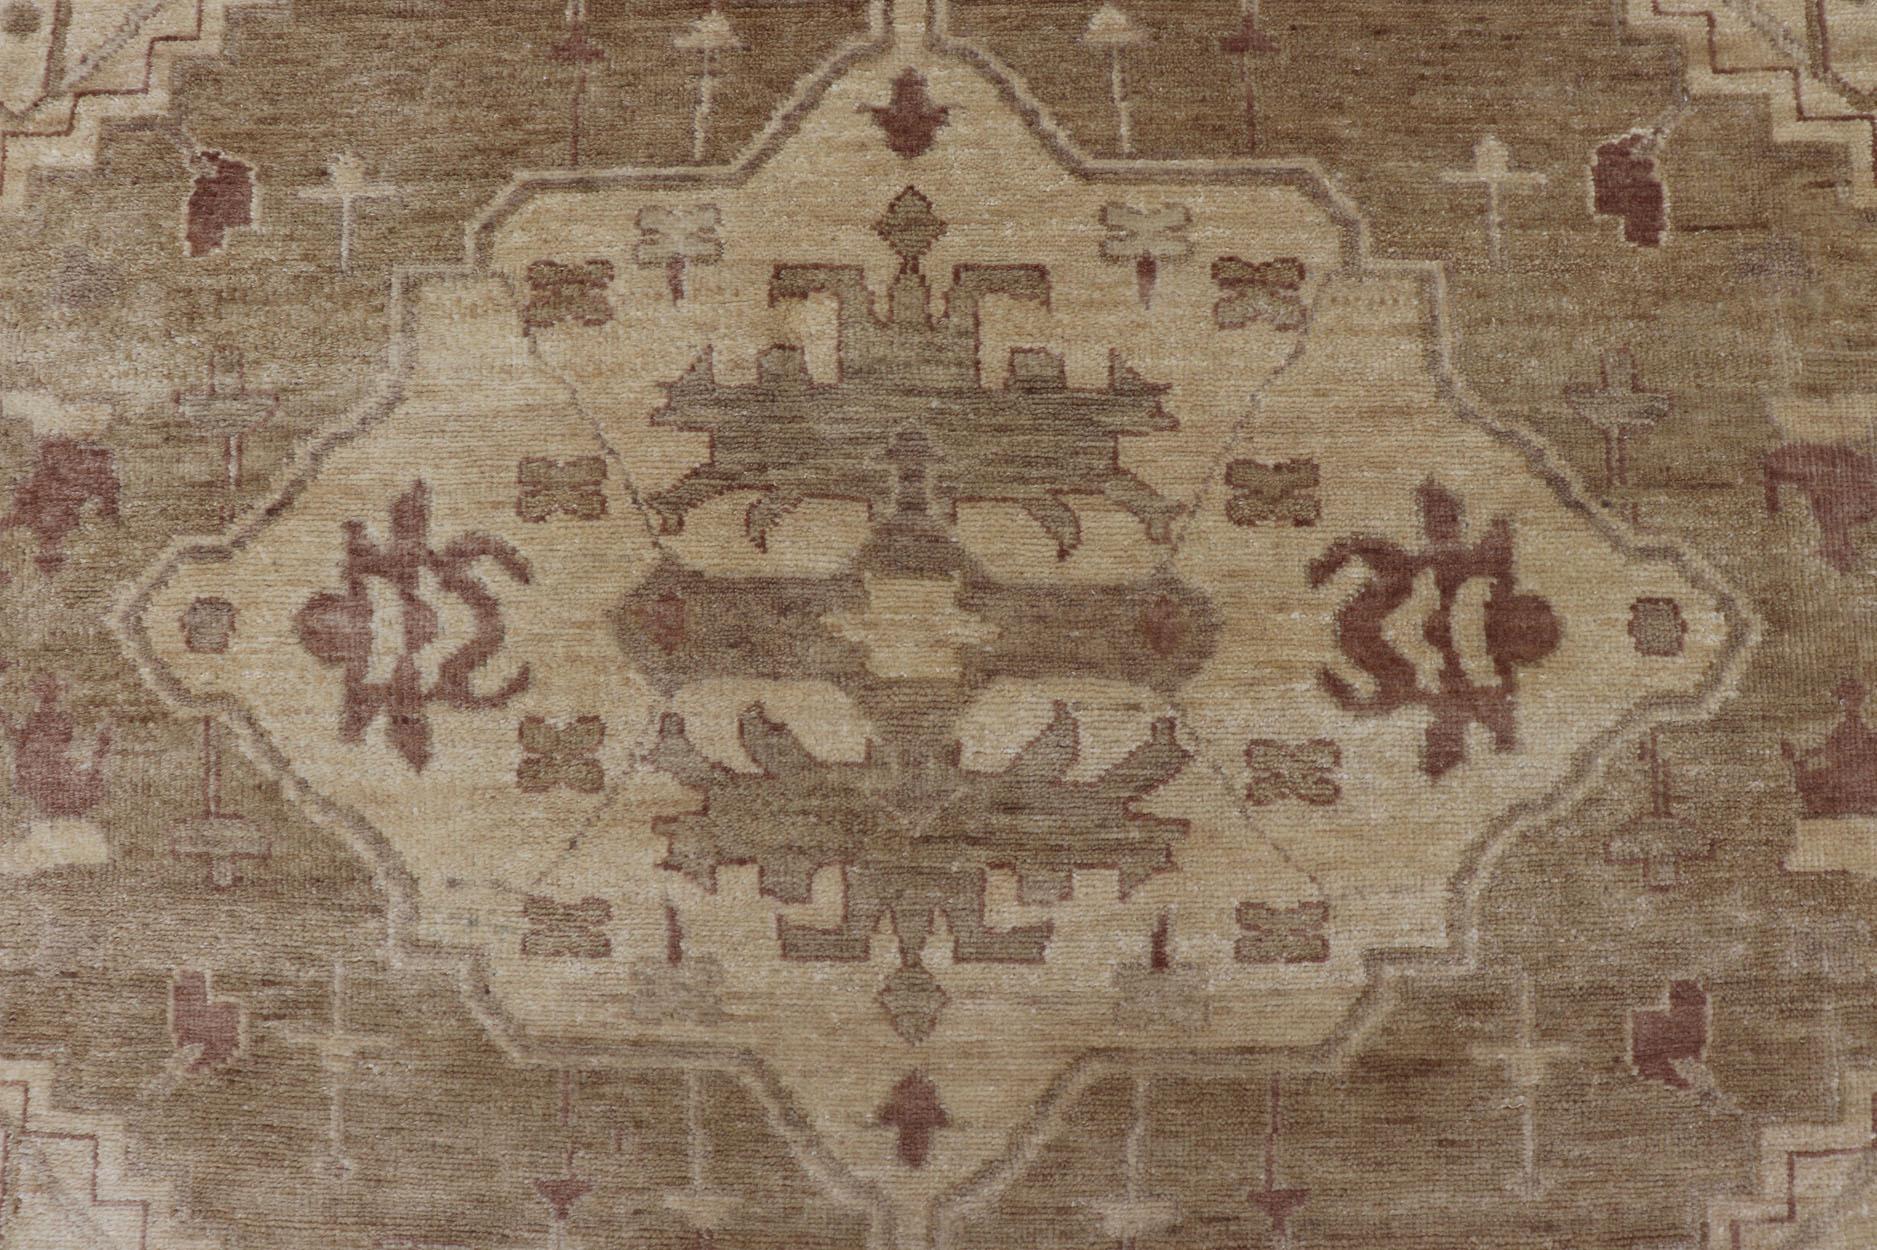 Contemporary Indian Floral Medallion Oushak Area Rug Hand-Knotted in Tan, Taupe, and Brown For Sale